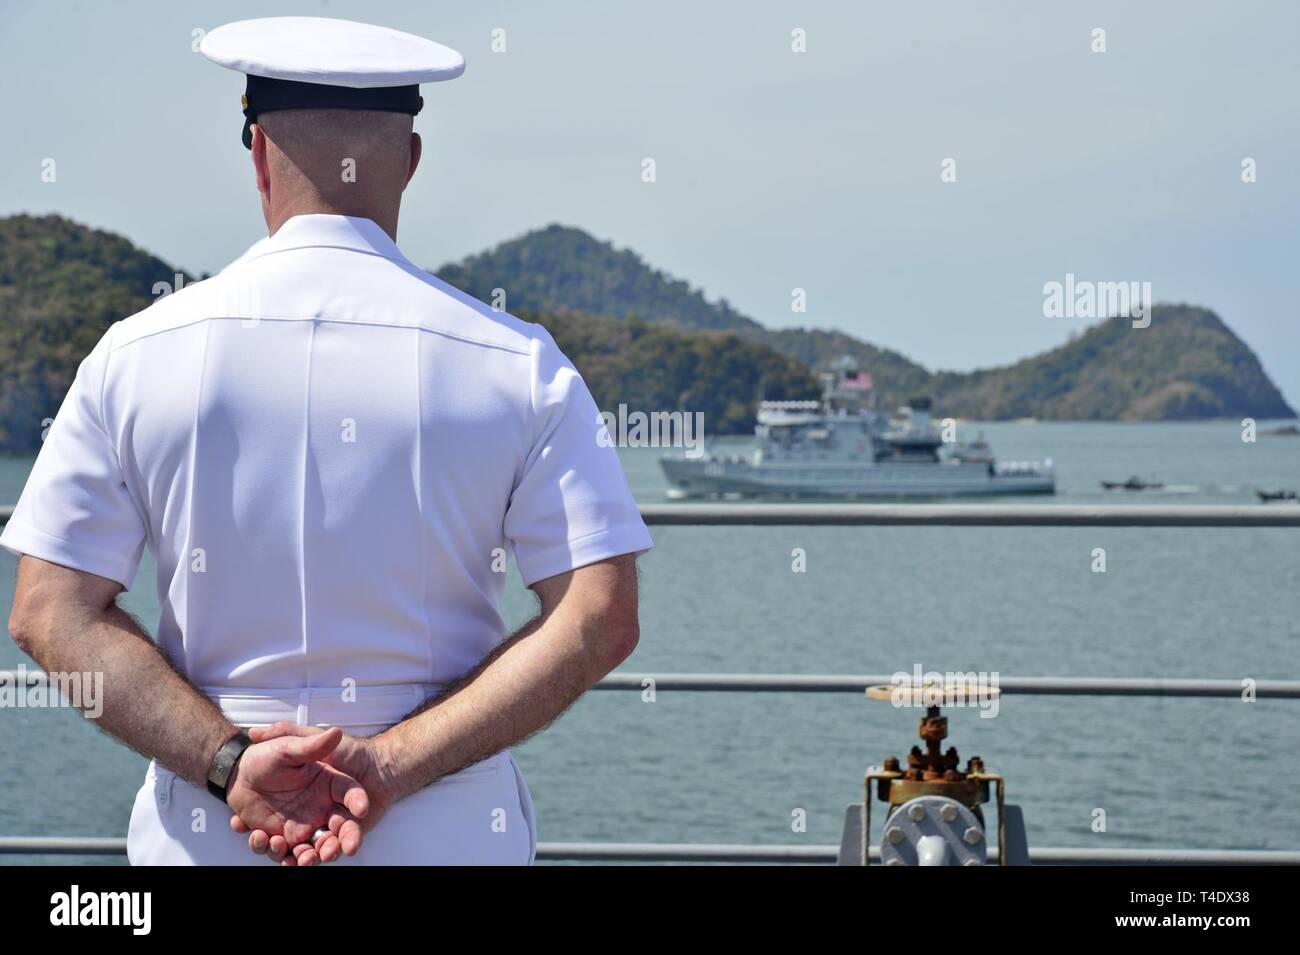 LANGKAWI, Malaysia (March 27, 2019) - U.S. 7th Fleet Flagship USS Blue Ridge (LCC 19) Command Master Chief James W. Grant, from Colorado Springs, Colo., stands at parade rest during the Langkawi International Maritime Aerospace Exhibition Fleet Review.  Blue Ridge is the oldest operational ship in the Navy, and as 7th Fleet command ship, is responsible for fostering relationships within the Indo-Pacific Region. Stock Photo